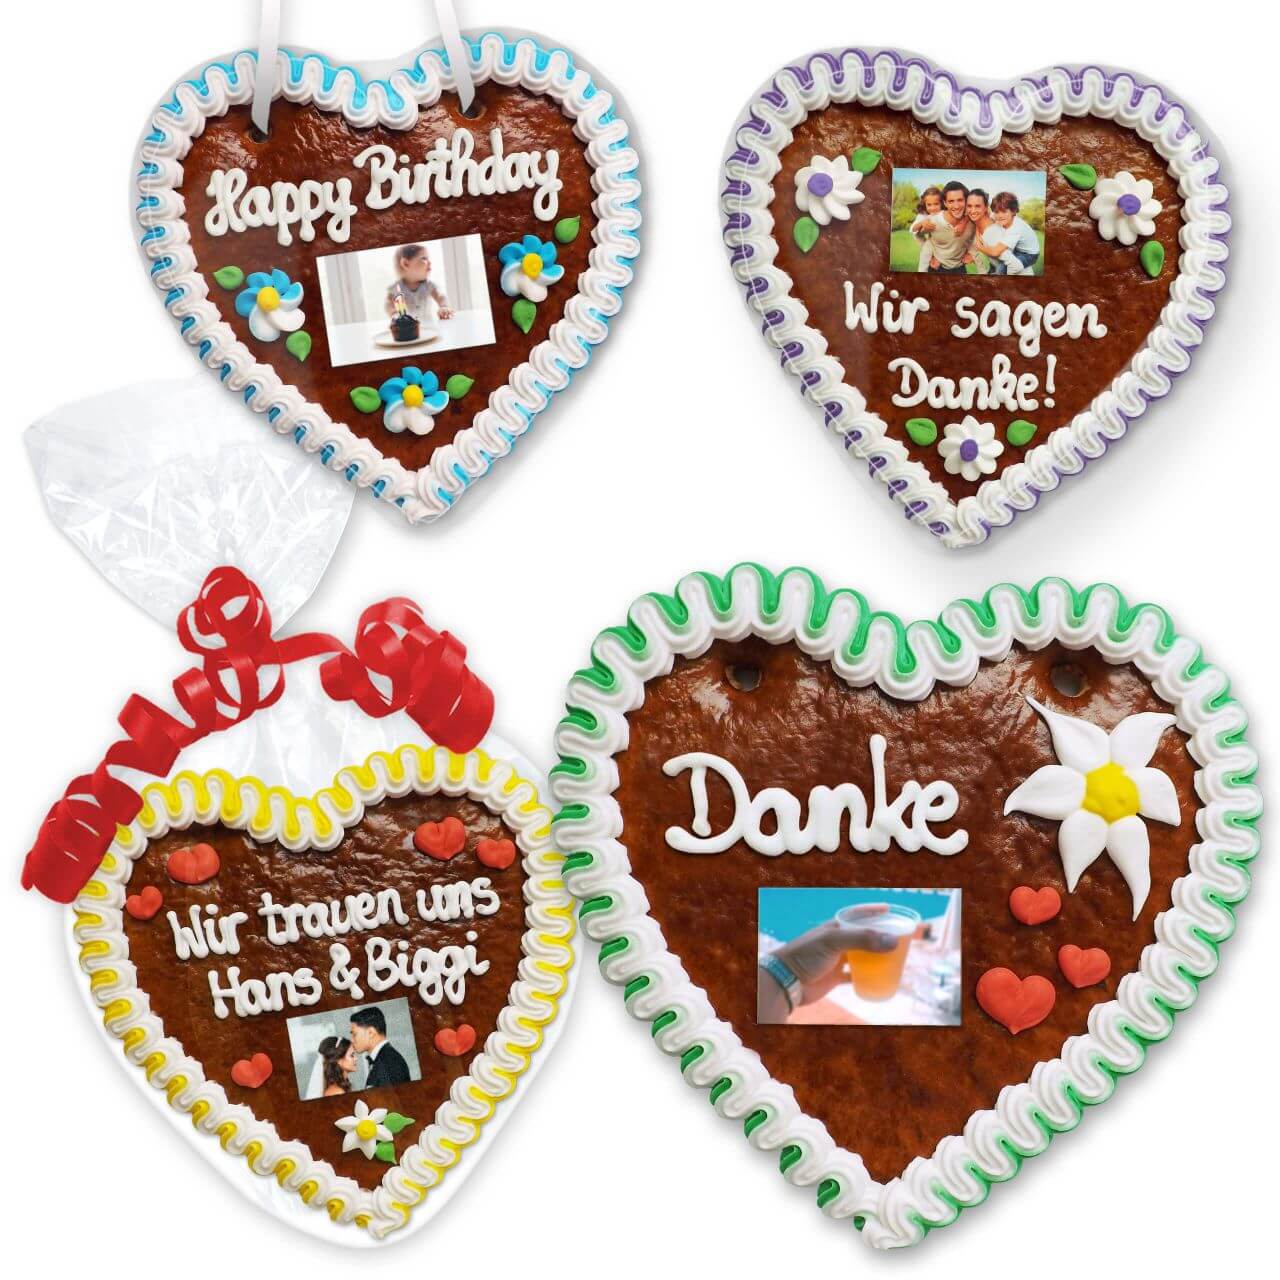 Individual gingerbread heart 18cm optional with photo and text of your choice